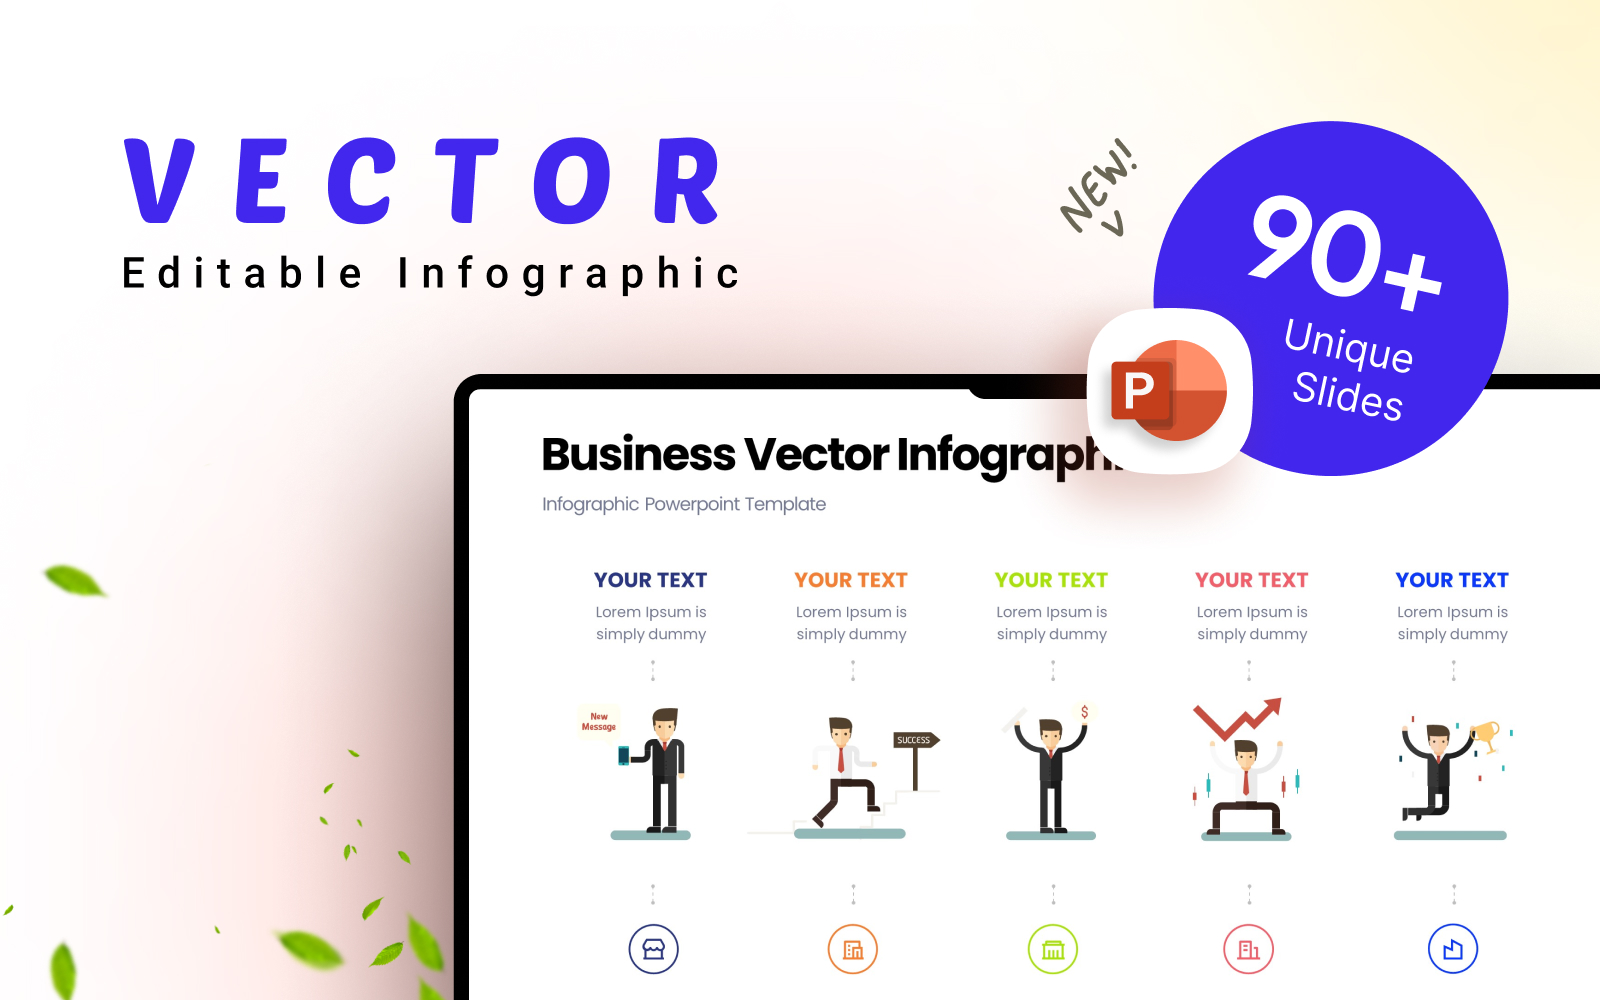 Business Vector Infographic Presentation Template